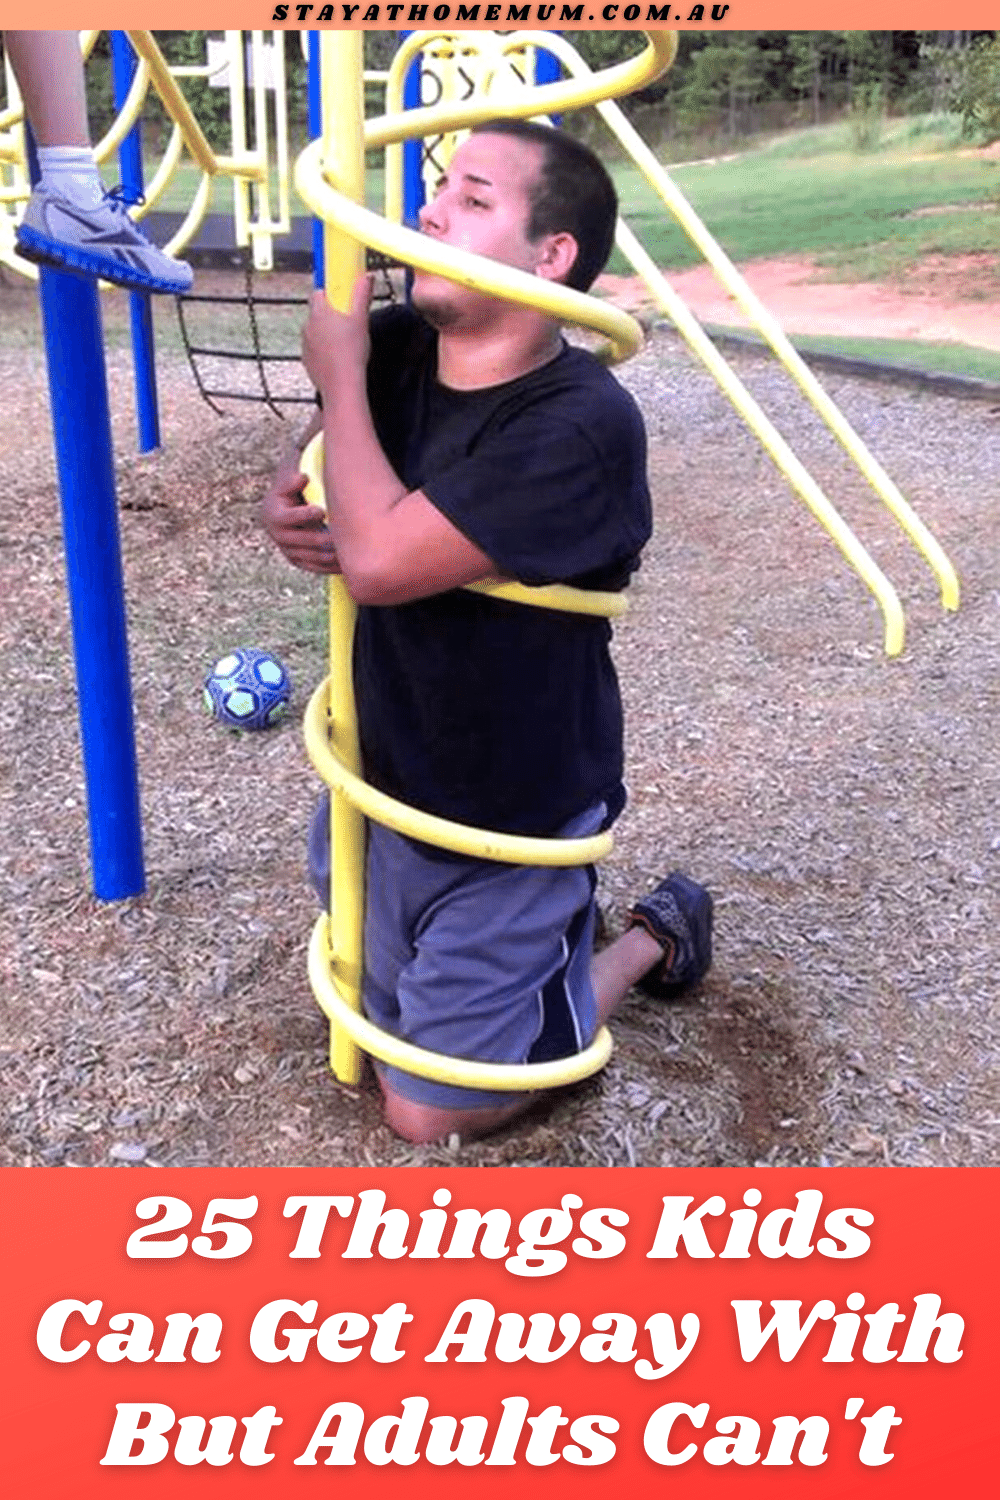 25 Things Kids Can Get Away With But Adults Can't | Stay At Home Mum